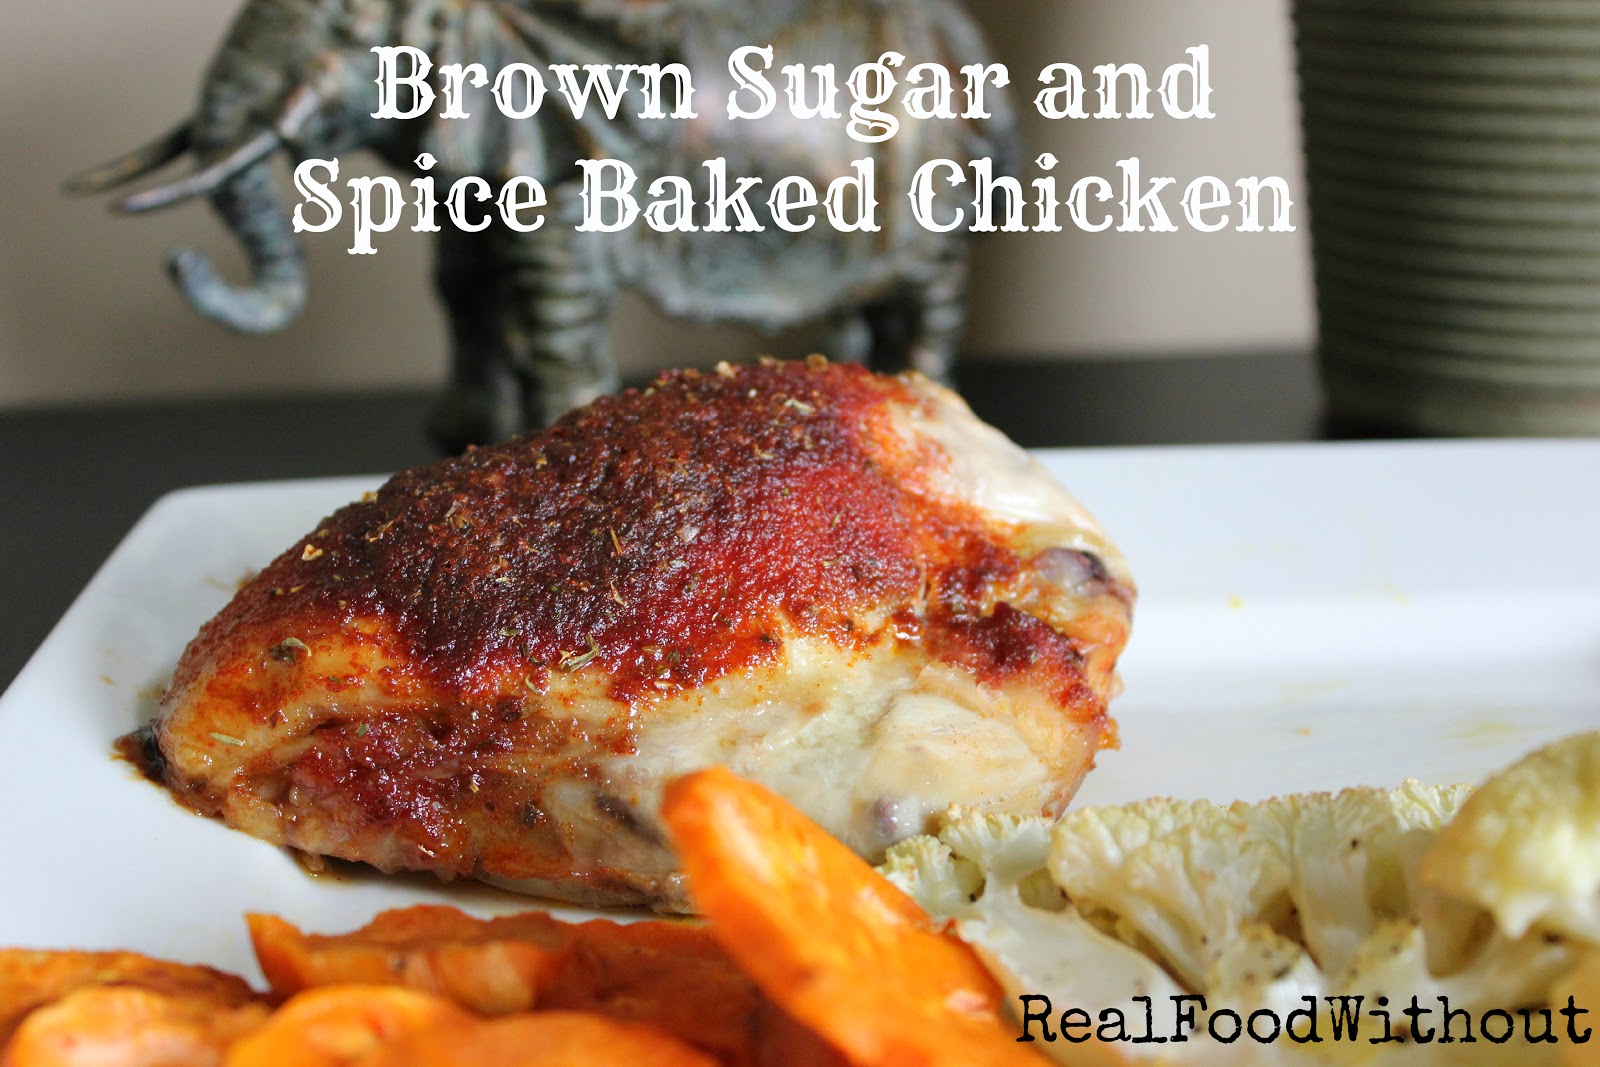 Real Food Without: Brown Sugar and Spice Baked Chicken